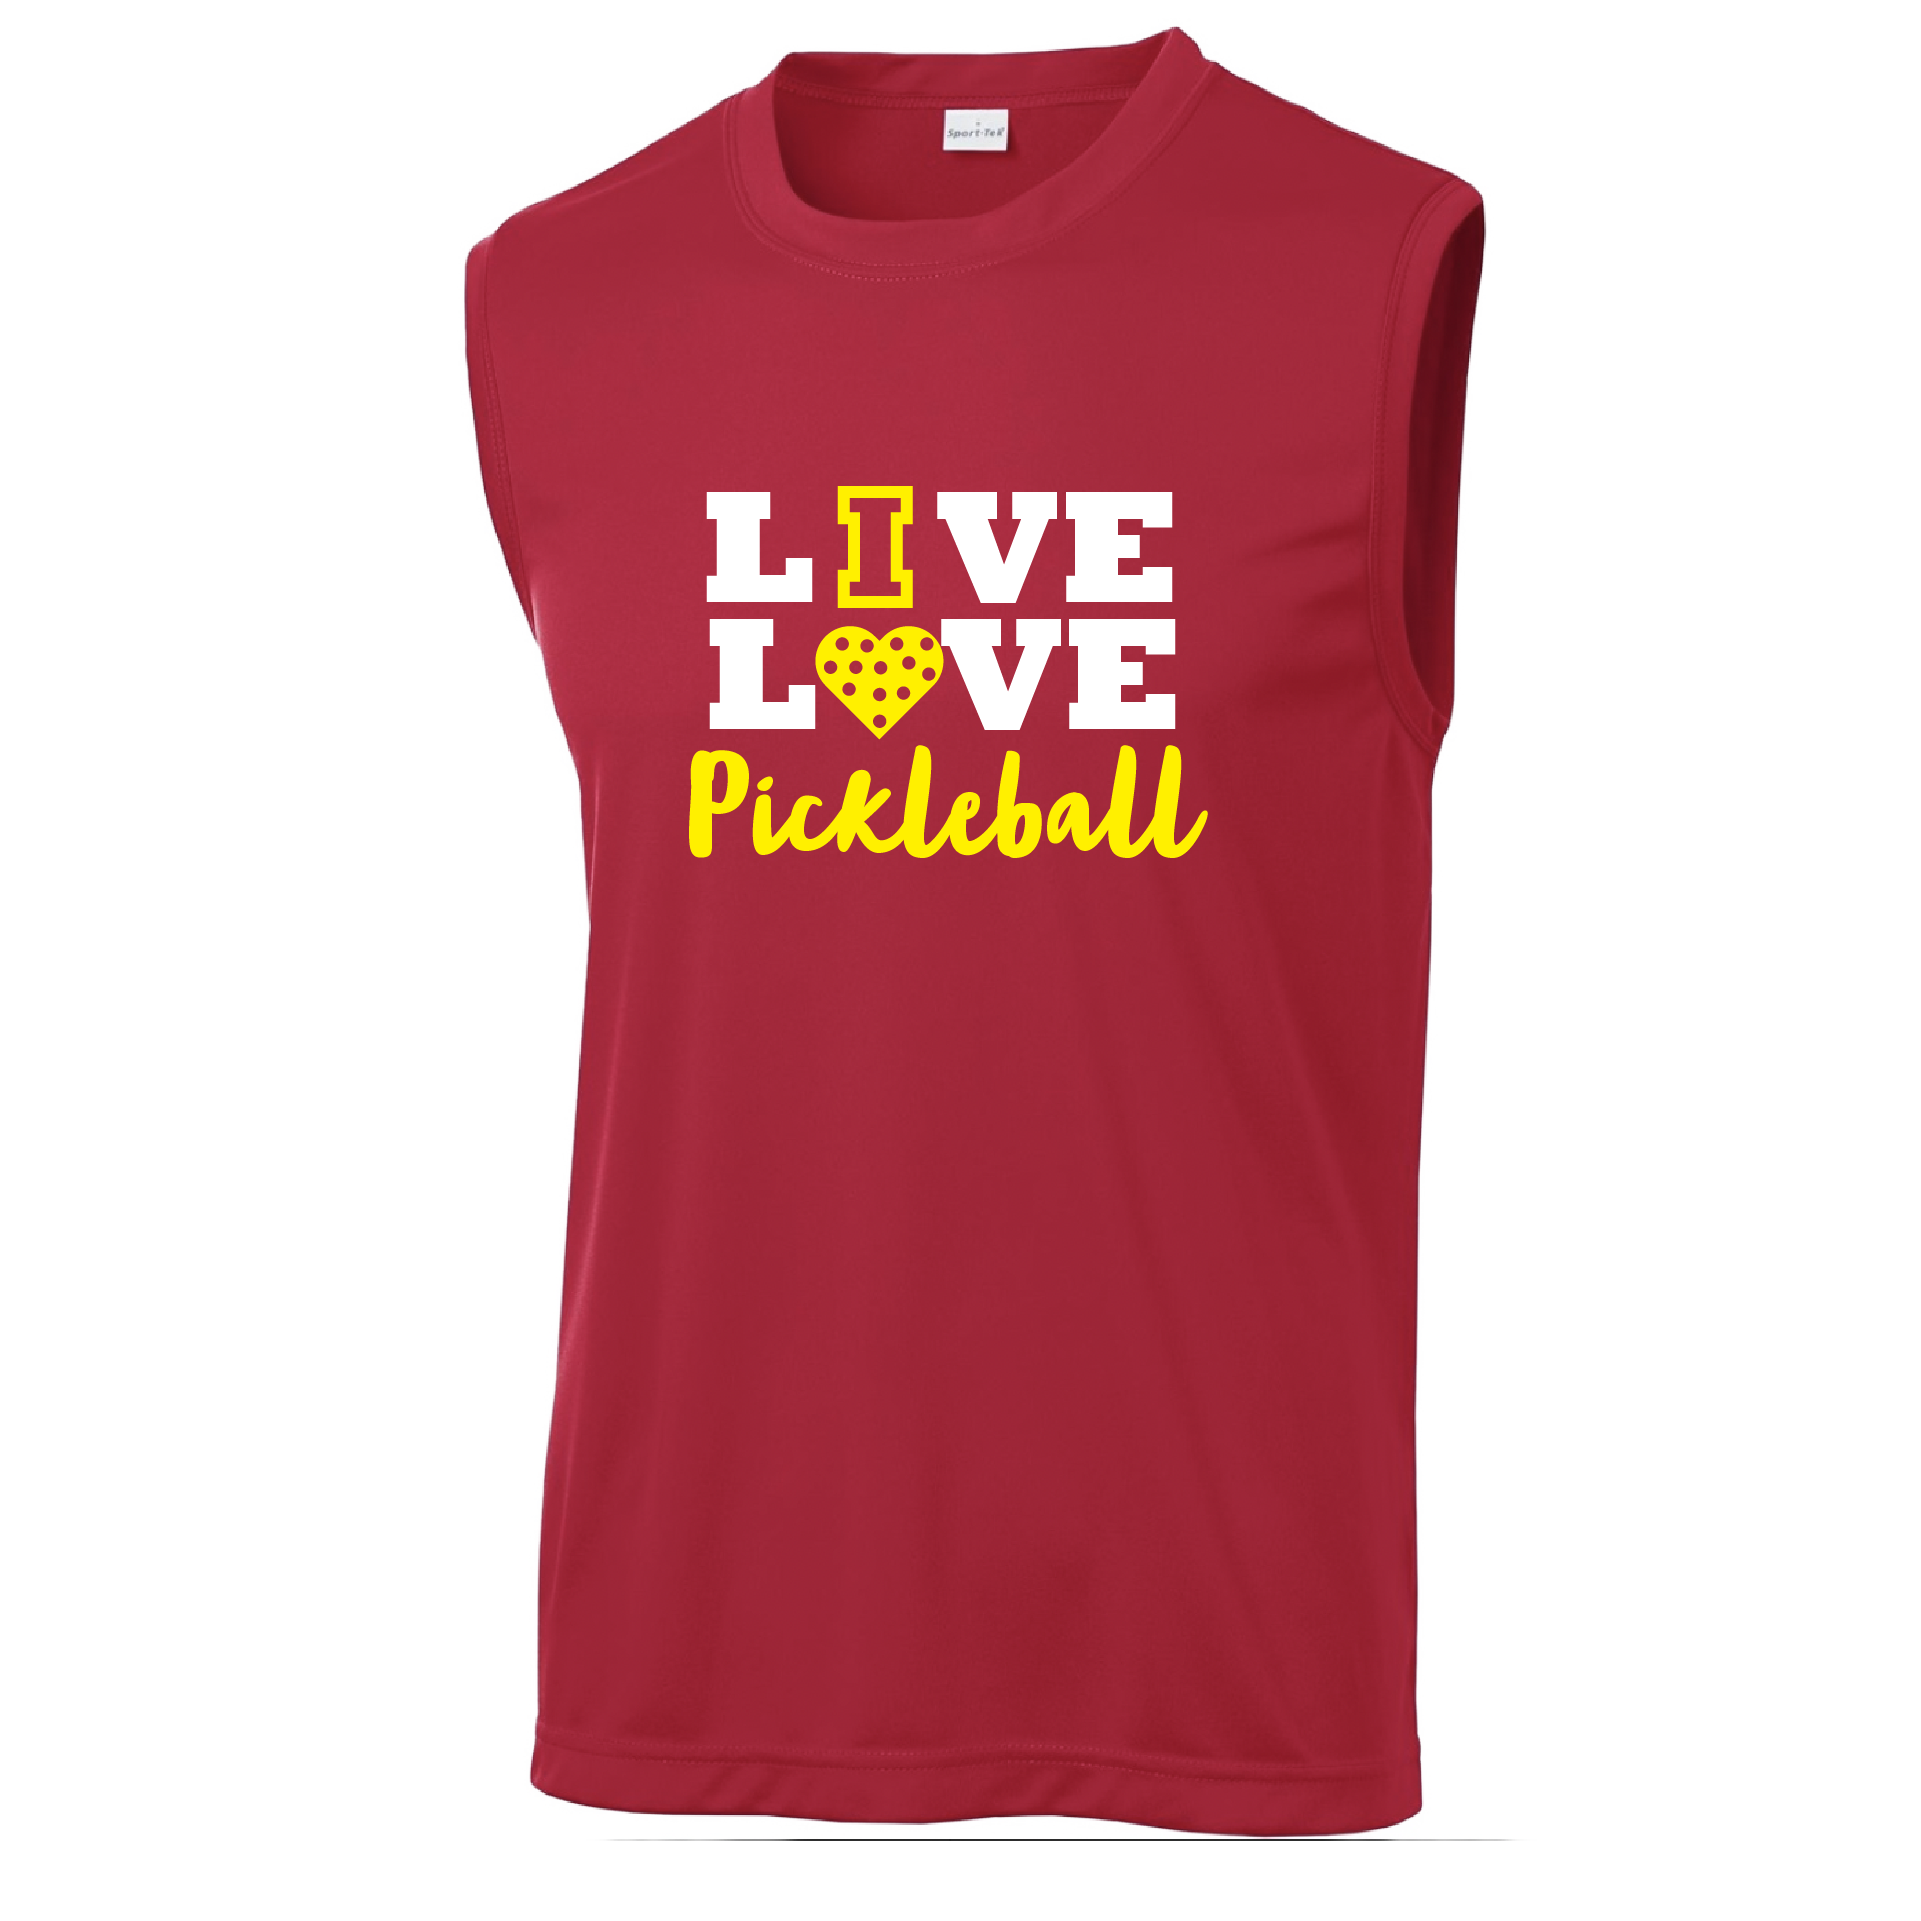 Pickleball Design: Live Love Pickleball  Men's Style: Sleeveless  Shirts are lightweight, roomy and highly breathable. These moisture-wicking shirts are designed for athletic performance. They feature PosiCharge technology to lock in color and prevent logos from fading. Removable tag and set-in sleeves for comfort.